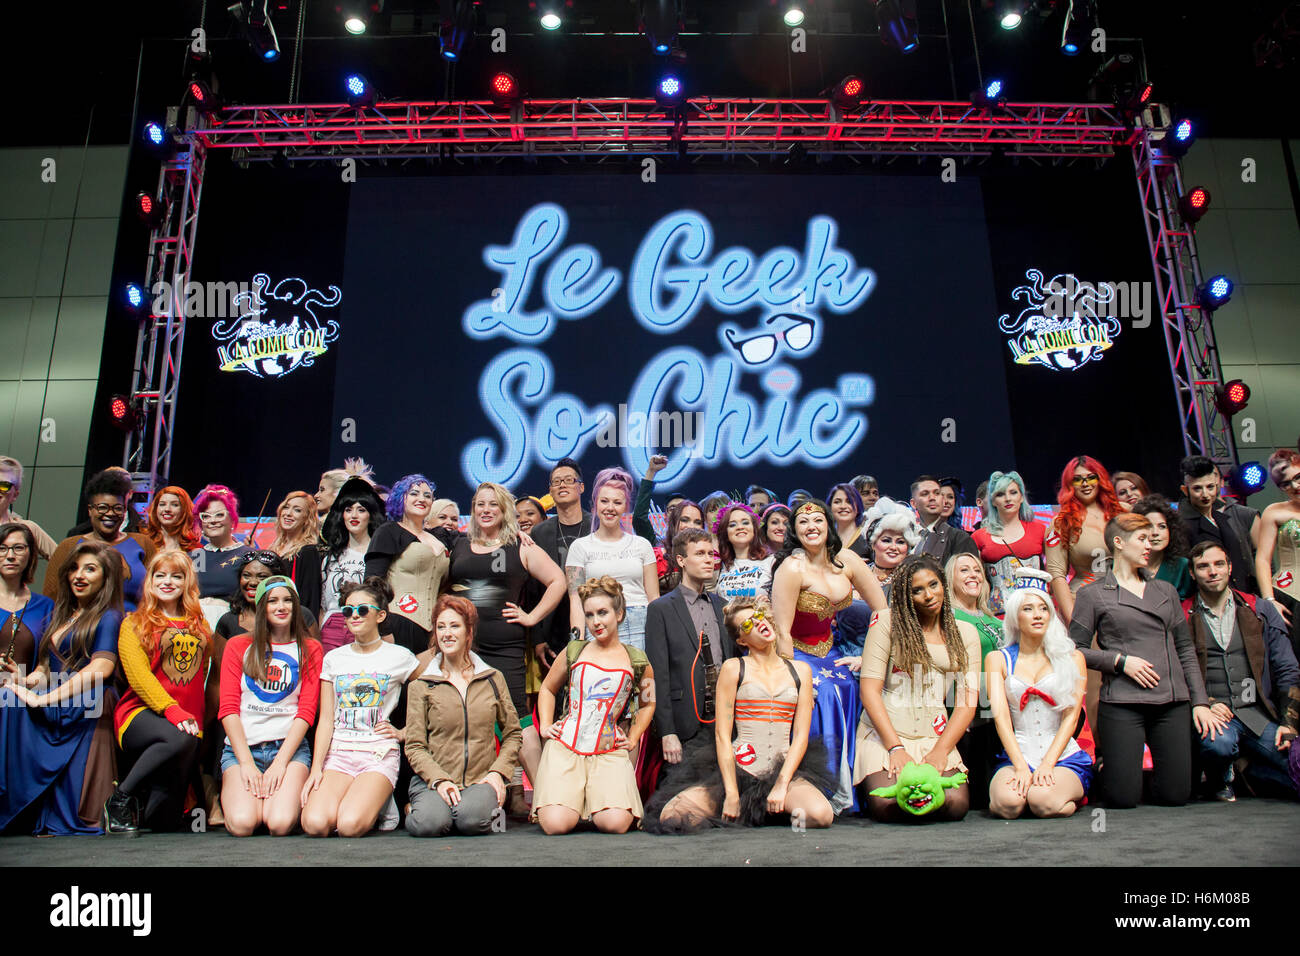 STAN LEE LA COMIC CON: October 29, 2016 Los Angeles, California. The models and designers at the Le Geek So Chic fashion show. Stock Photo